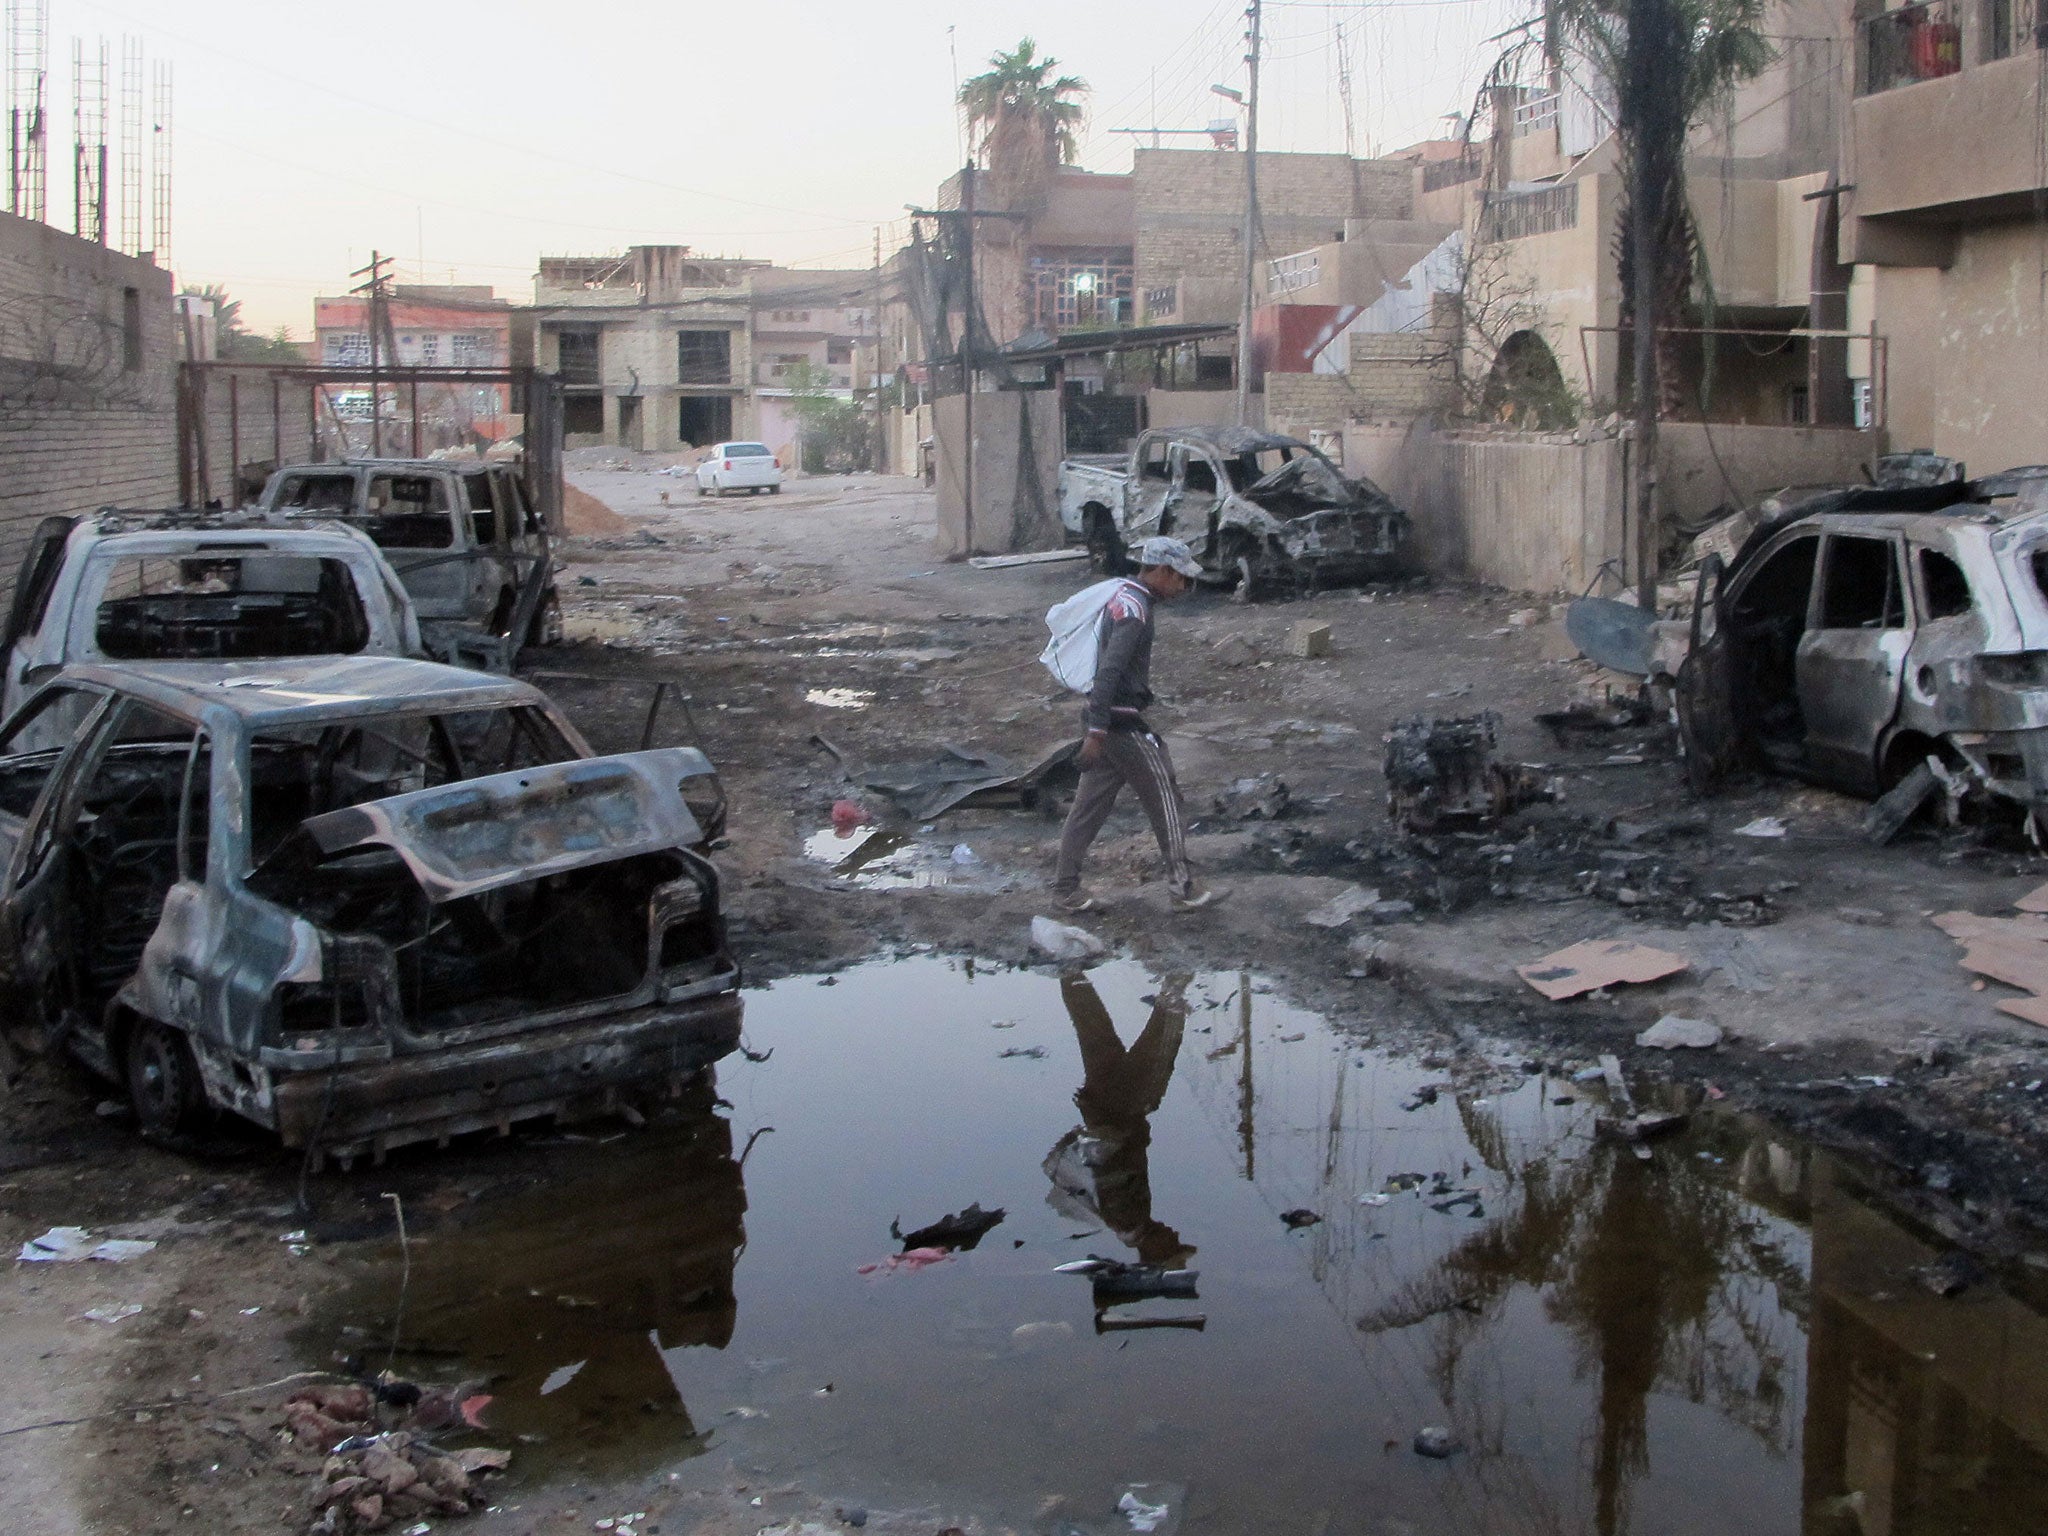 An Iraqi man inspects the aftermath of a bombing in the Baghdad al-Jadidah district,